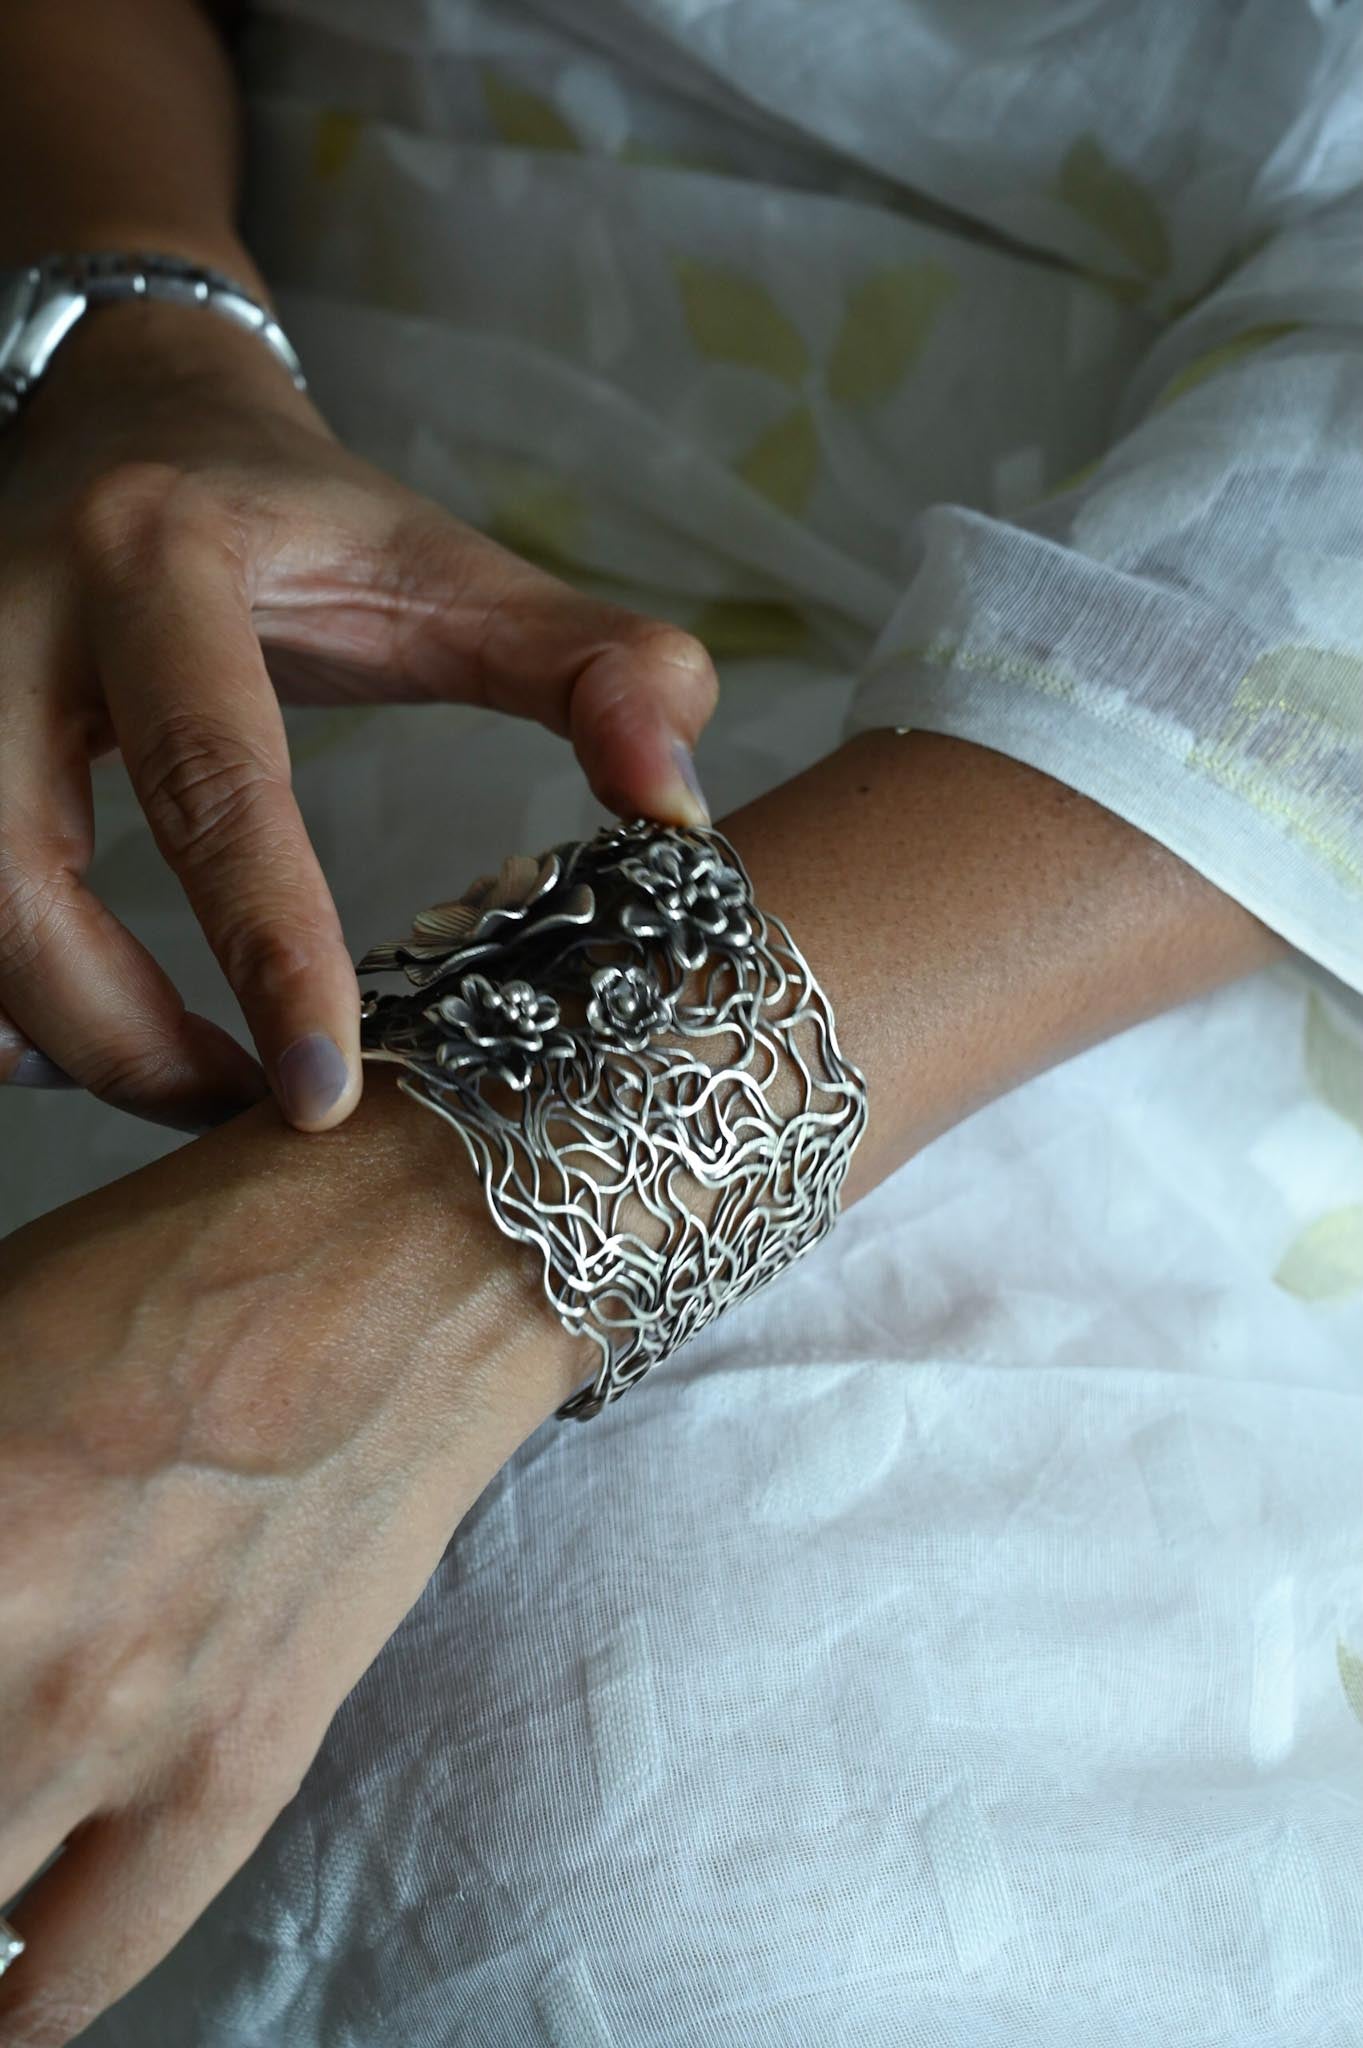 Handcrafted Flowers and Vines Silver Hand Cuff